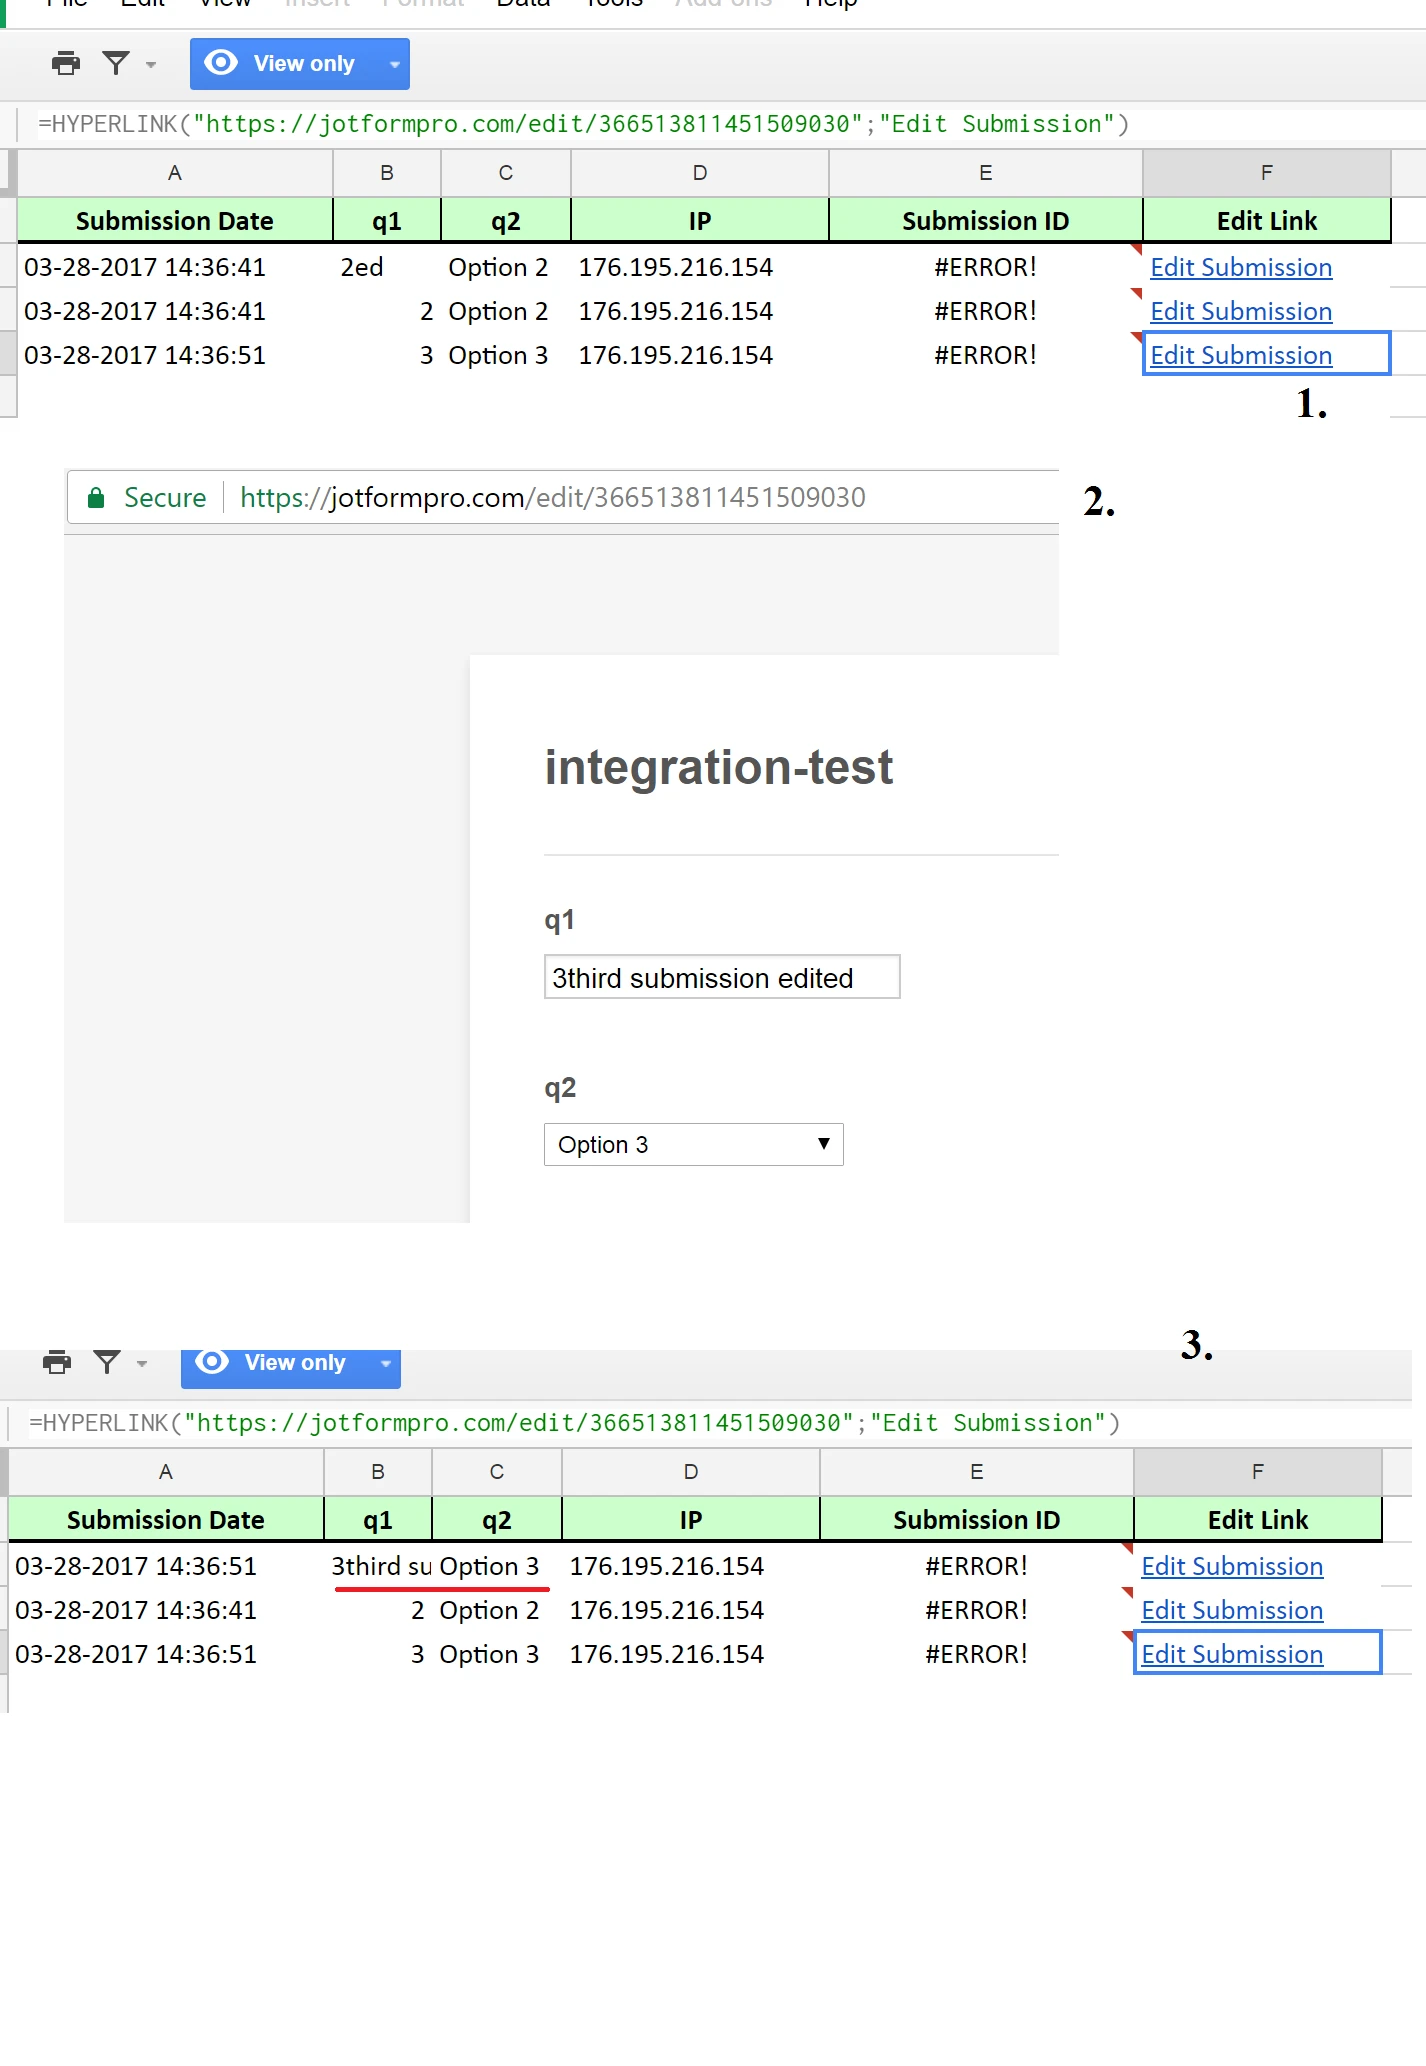 Google spreadsheet integration: Submission IDs showing as #ERROR! in the integrated sheet Image 1 Screenshot 20